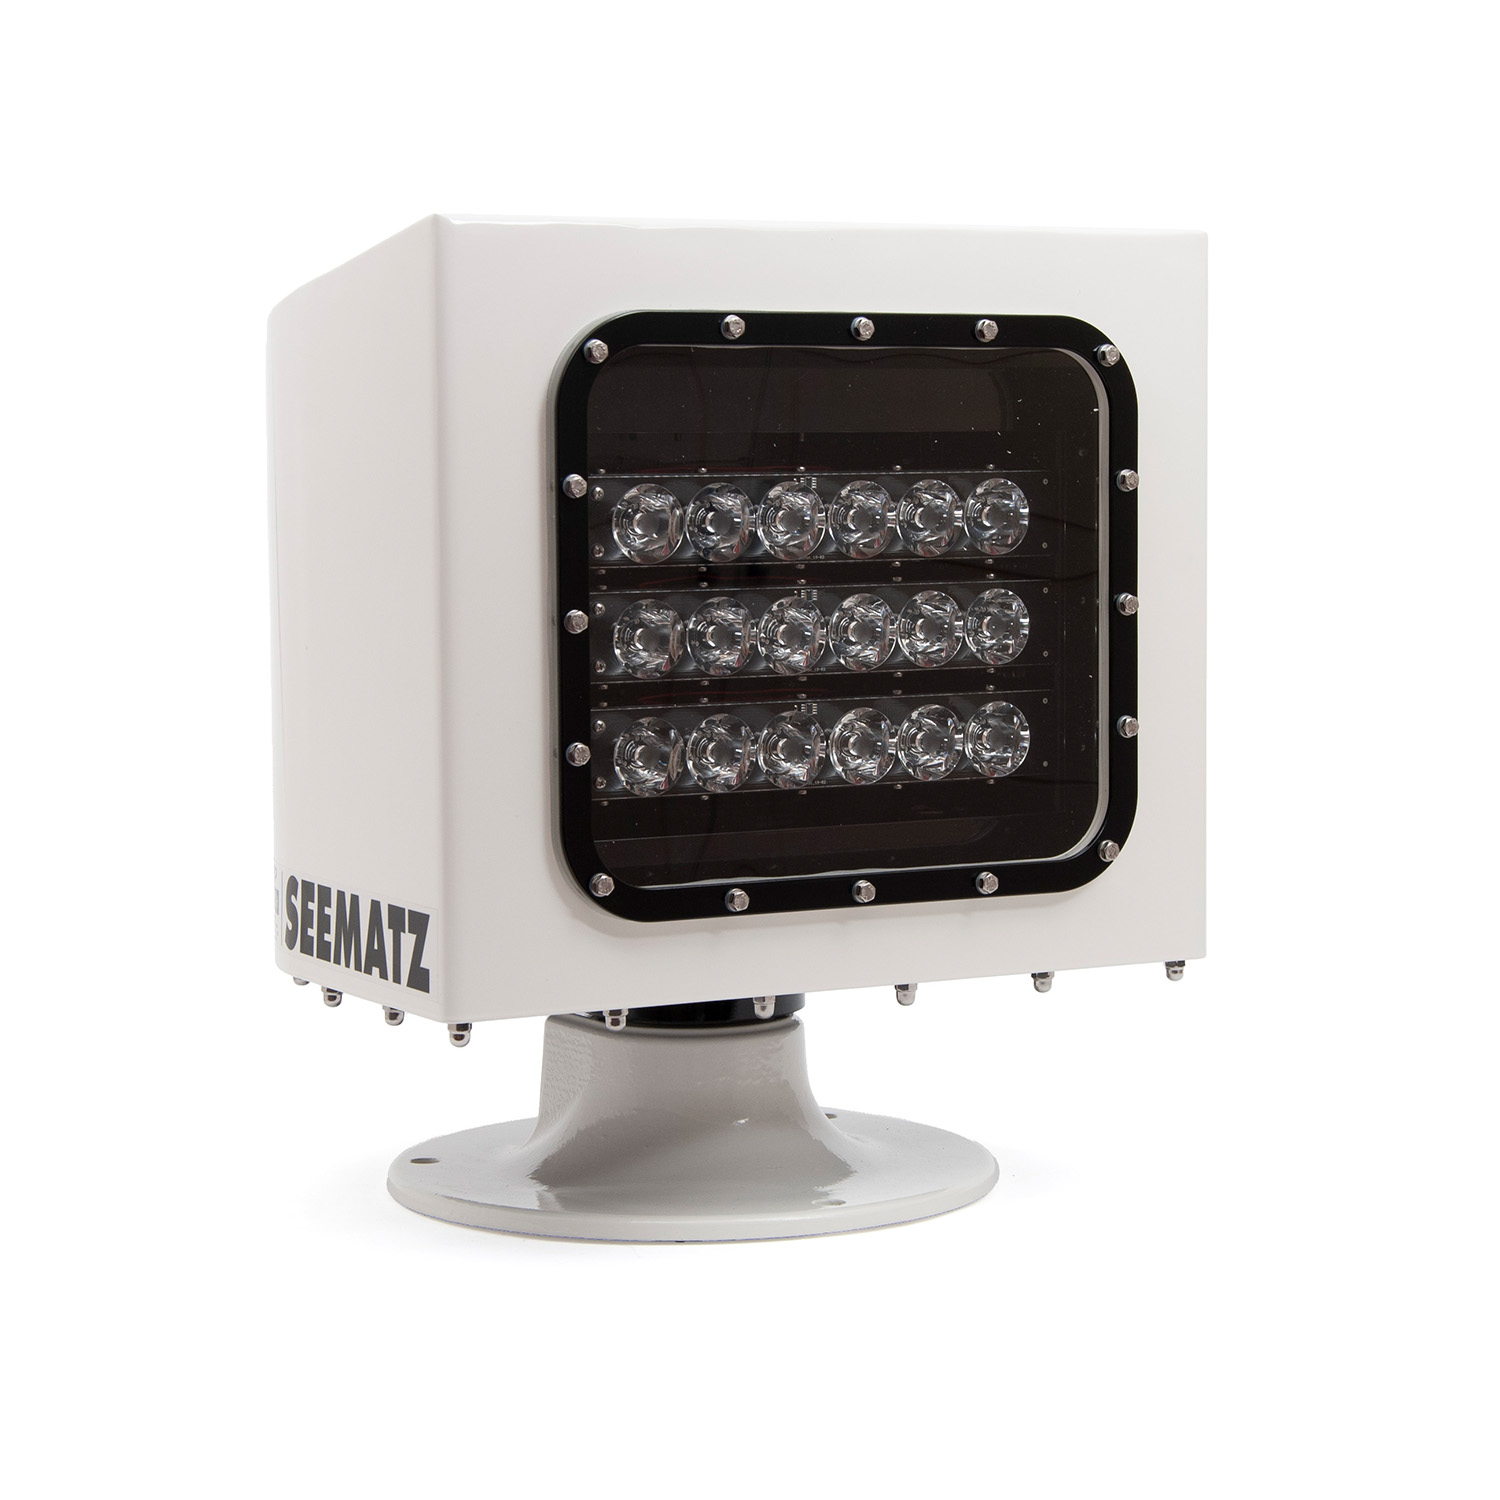 LED X LIGHT 230VAC Light up to 160W 230V Up to 1500m range, 170m field of view